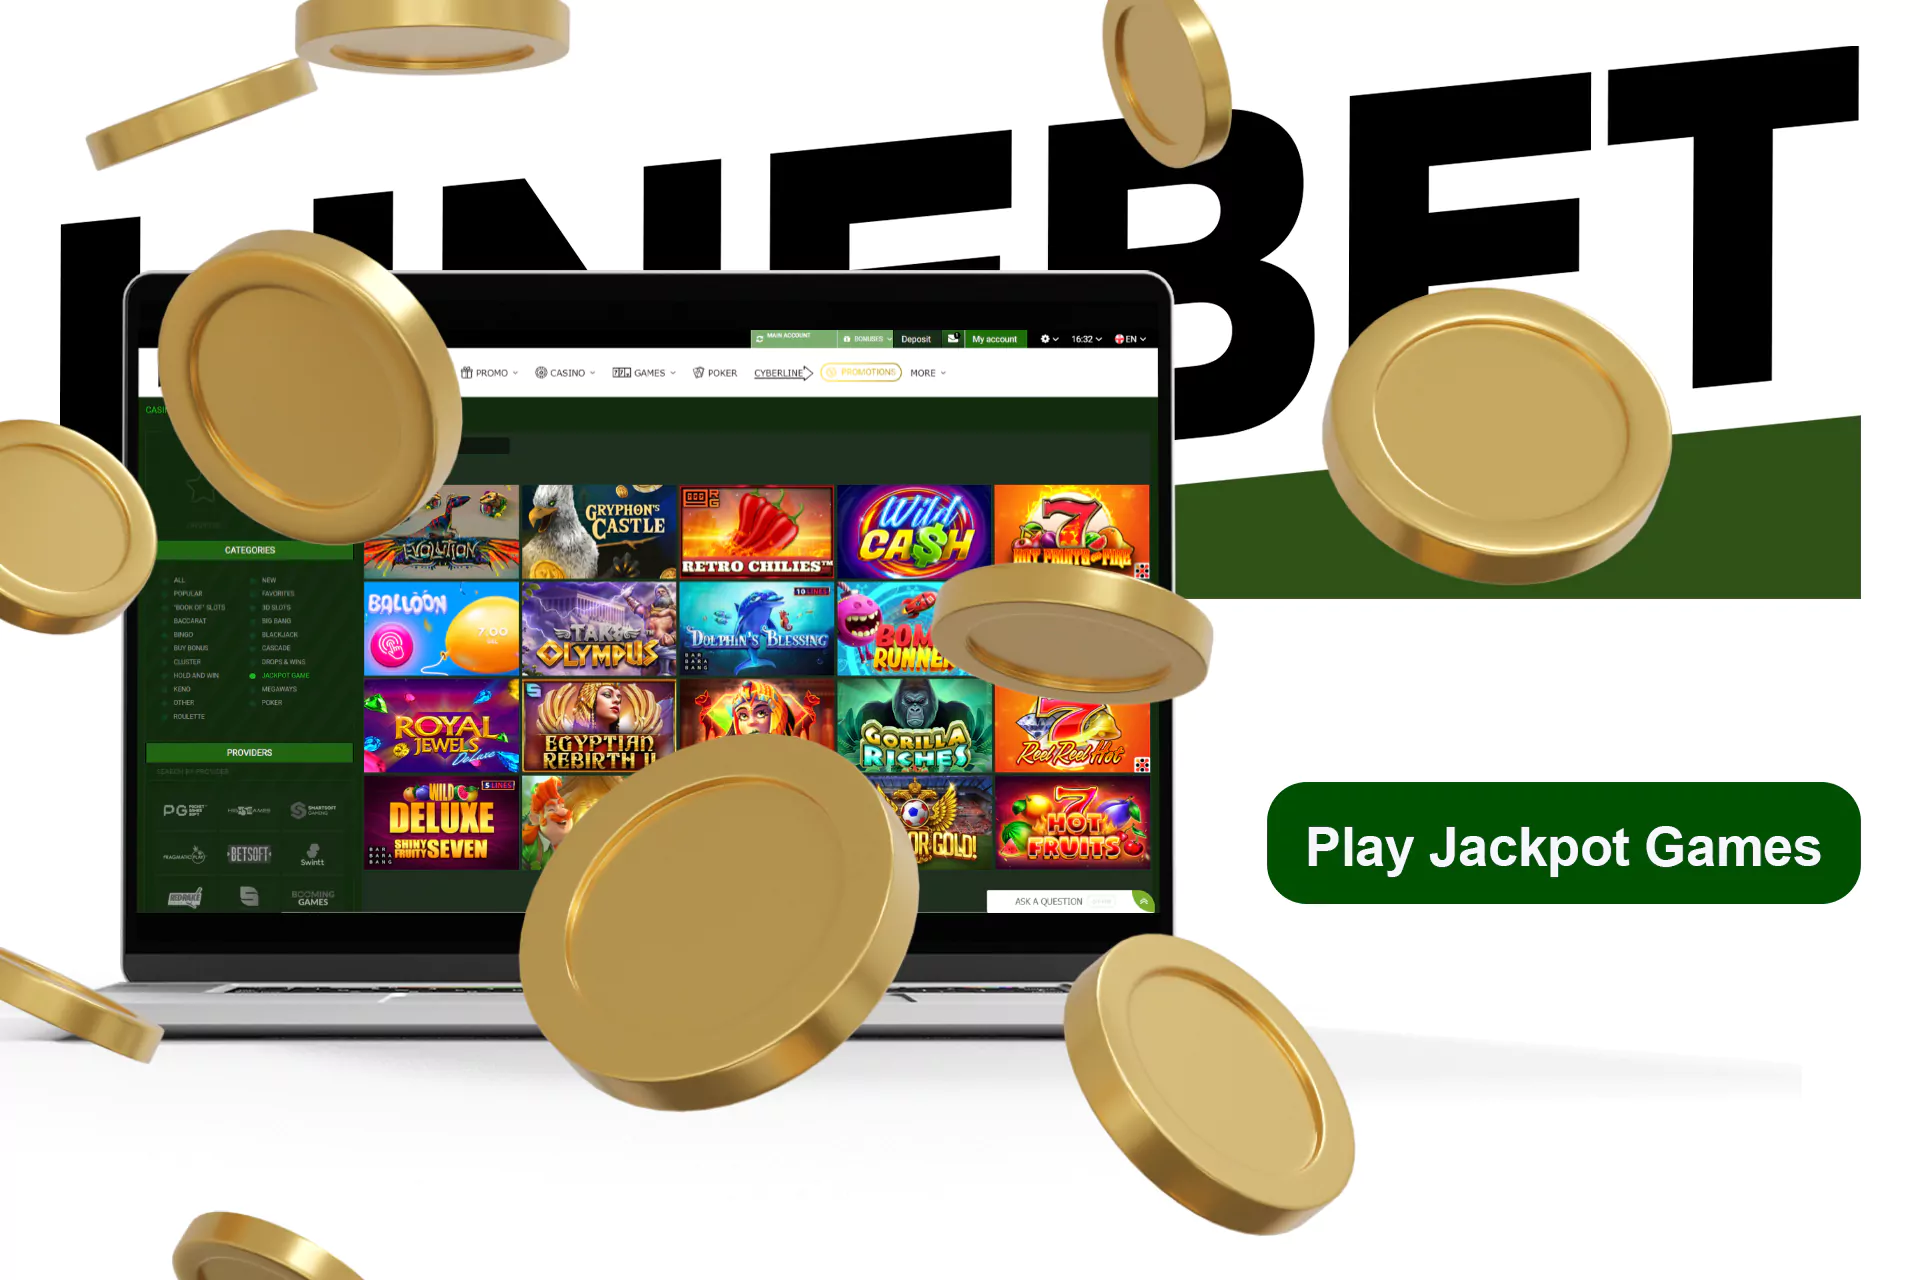 Jackpot games are rather popular because of their high awards.